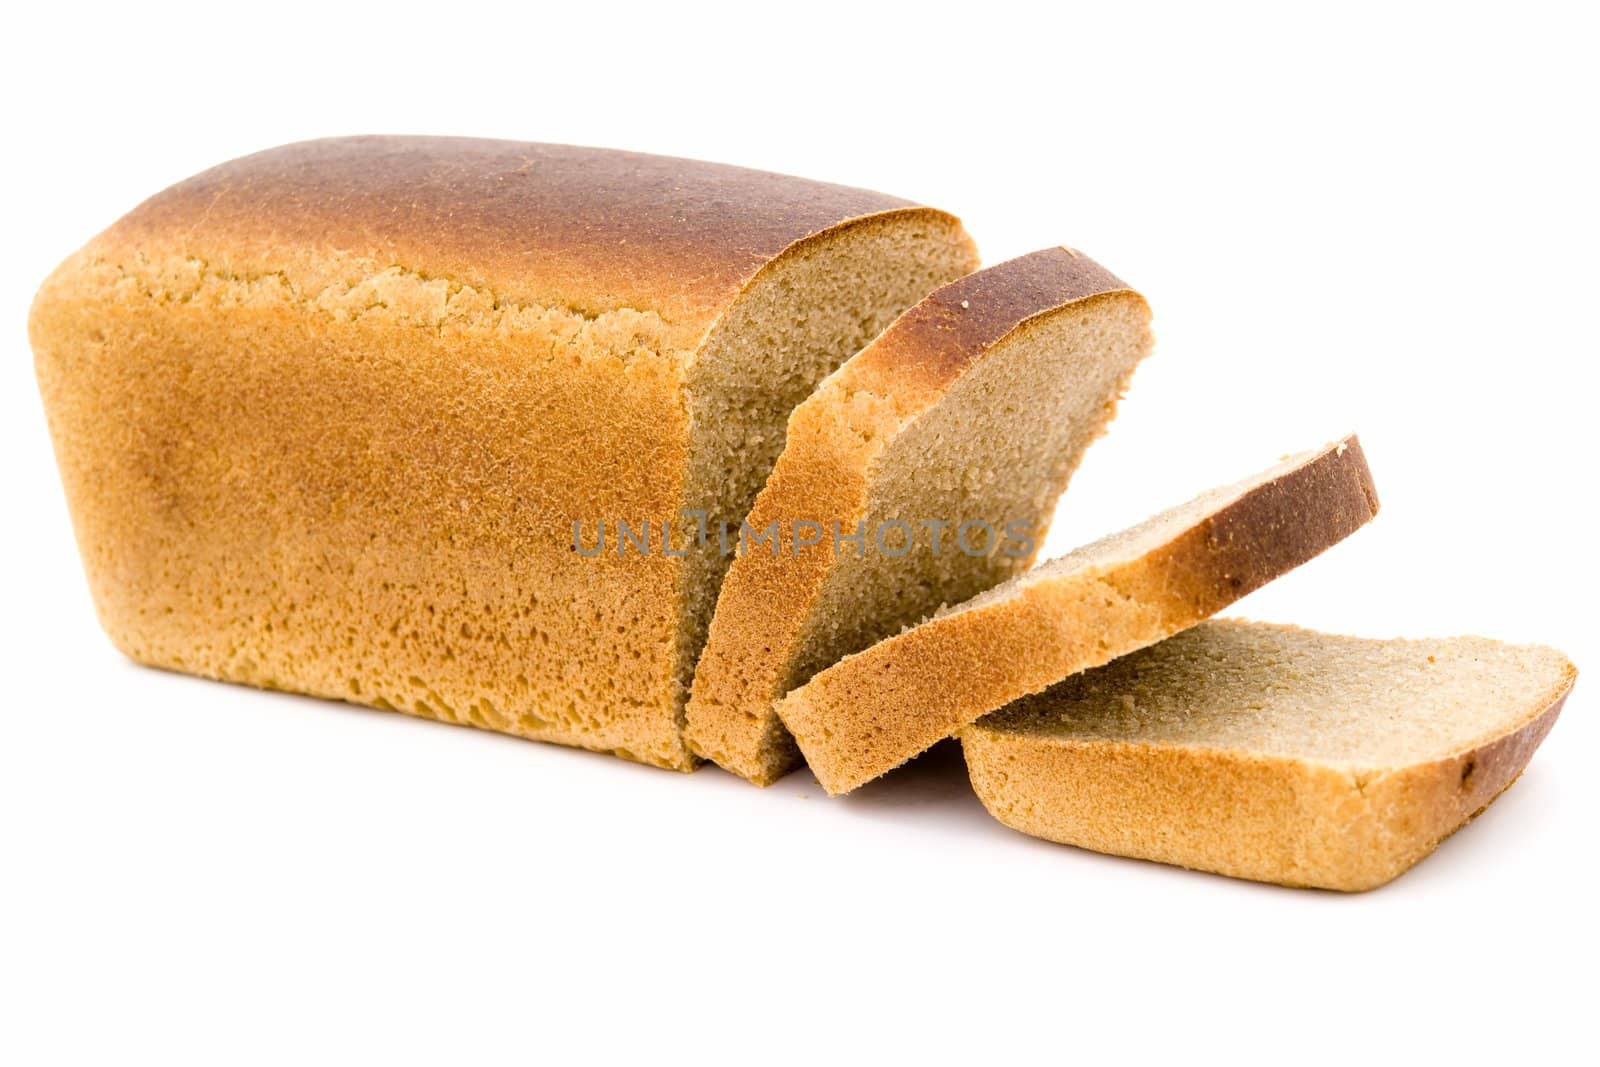 black bread loaf on a white background.